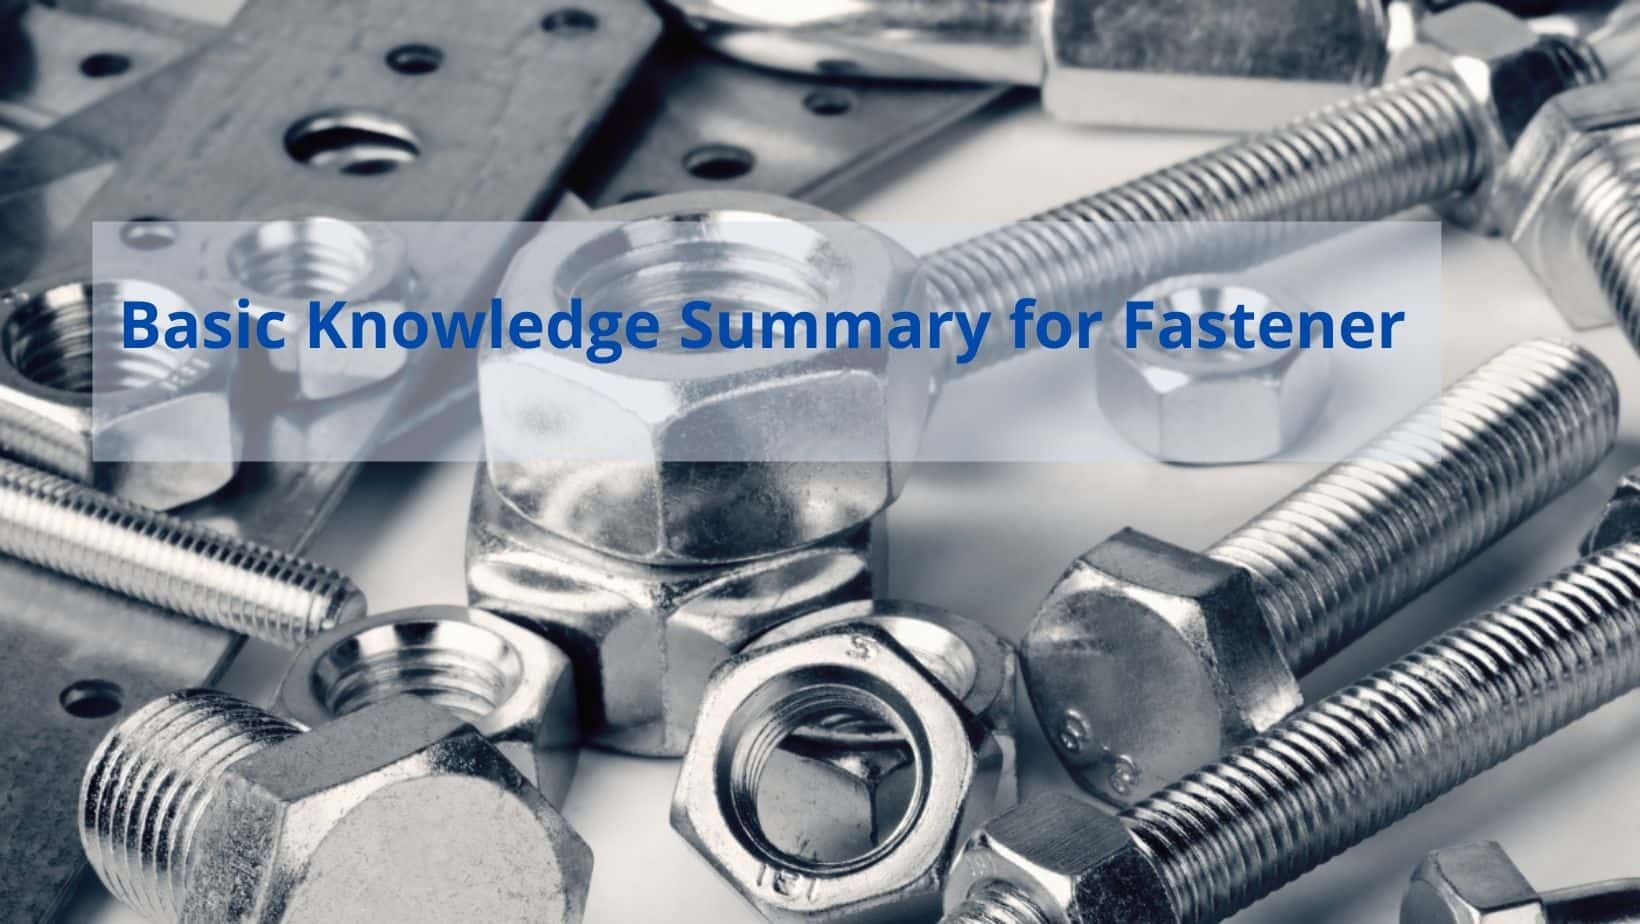 Basic Knowledge Summary for Fastener